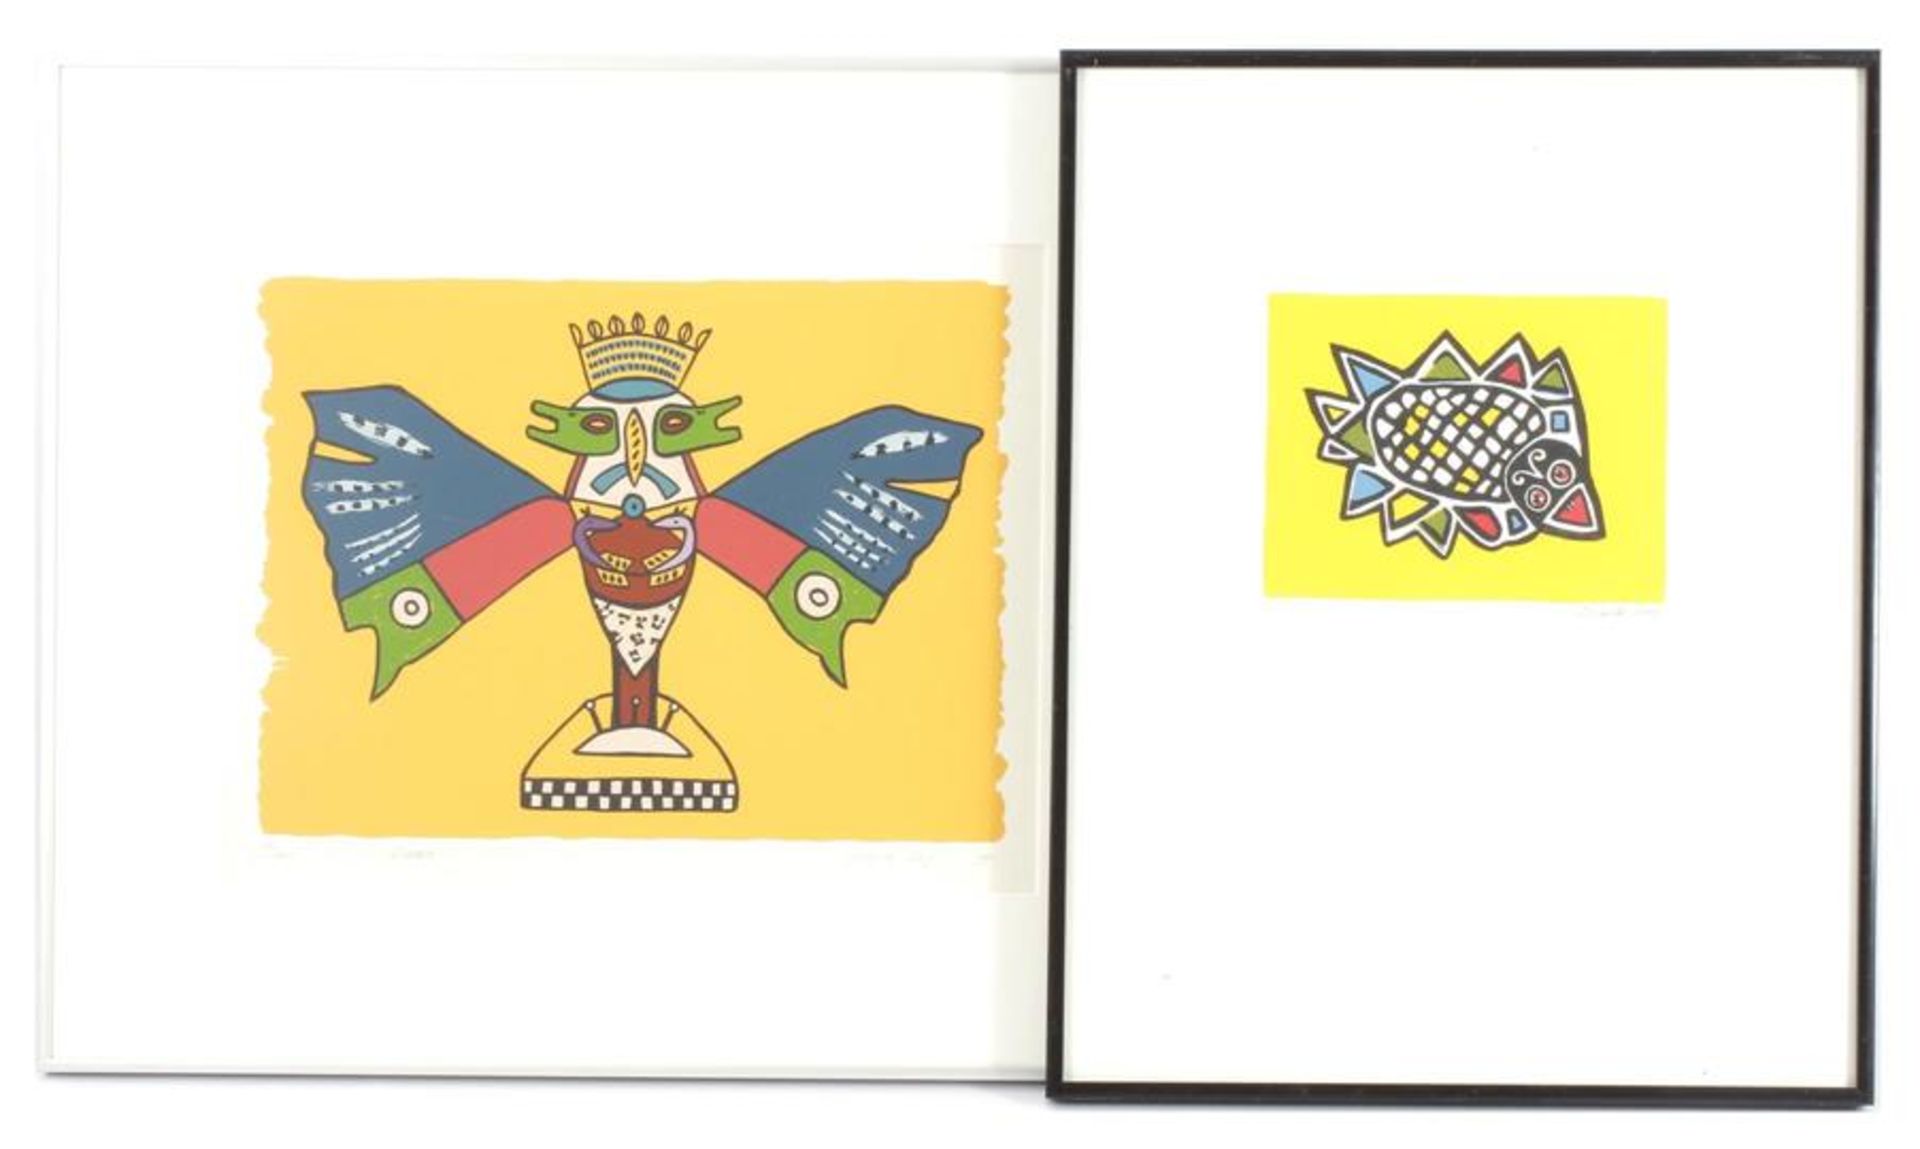 Signed Lindy de Jong, 2 times graphics, Fish 15x20.5 cm and Butterfly dated 1992, 386/500, 28x38 cm